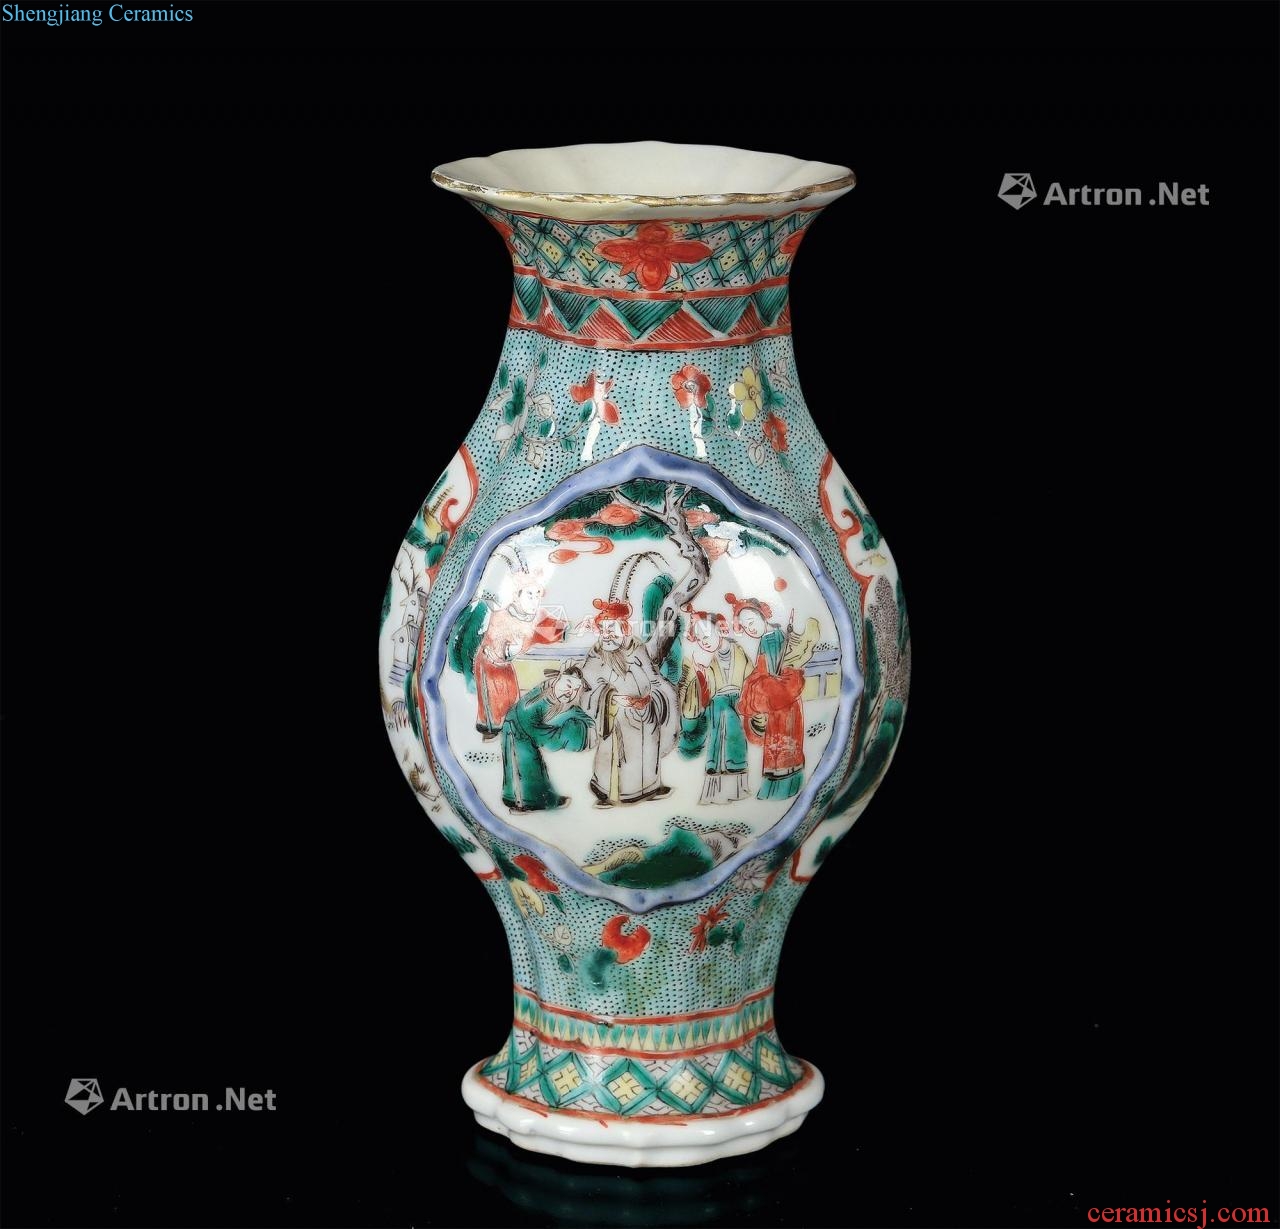 In the qing dynasty colorful medallion flat bottles